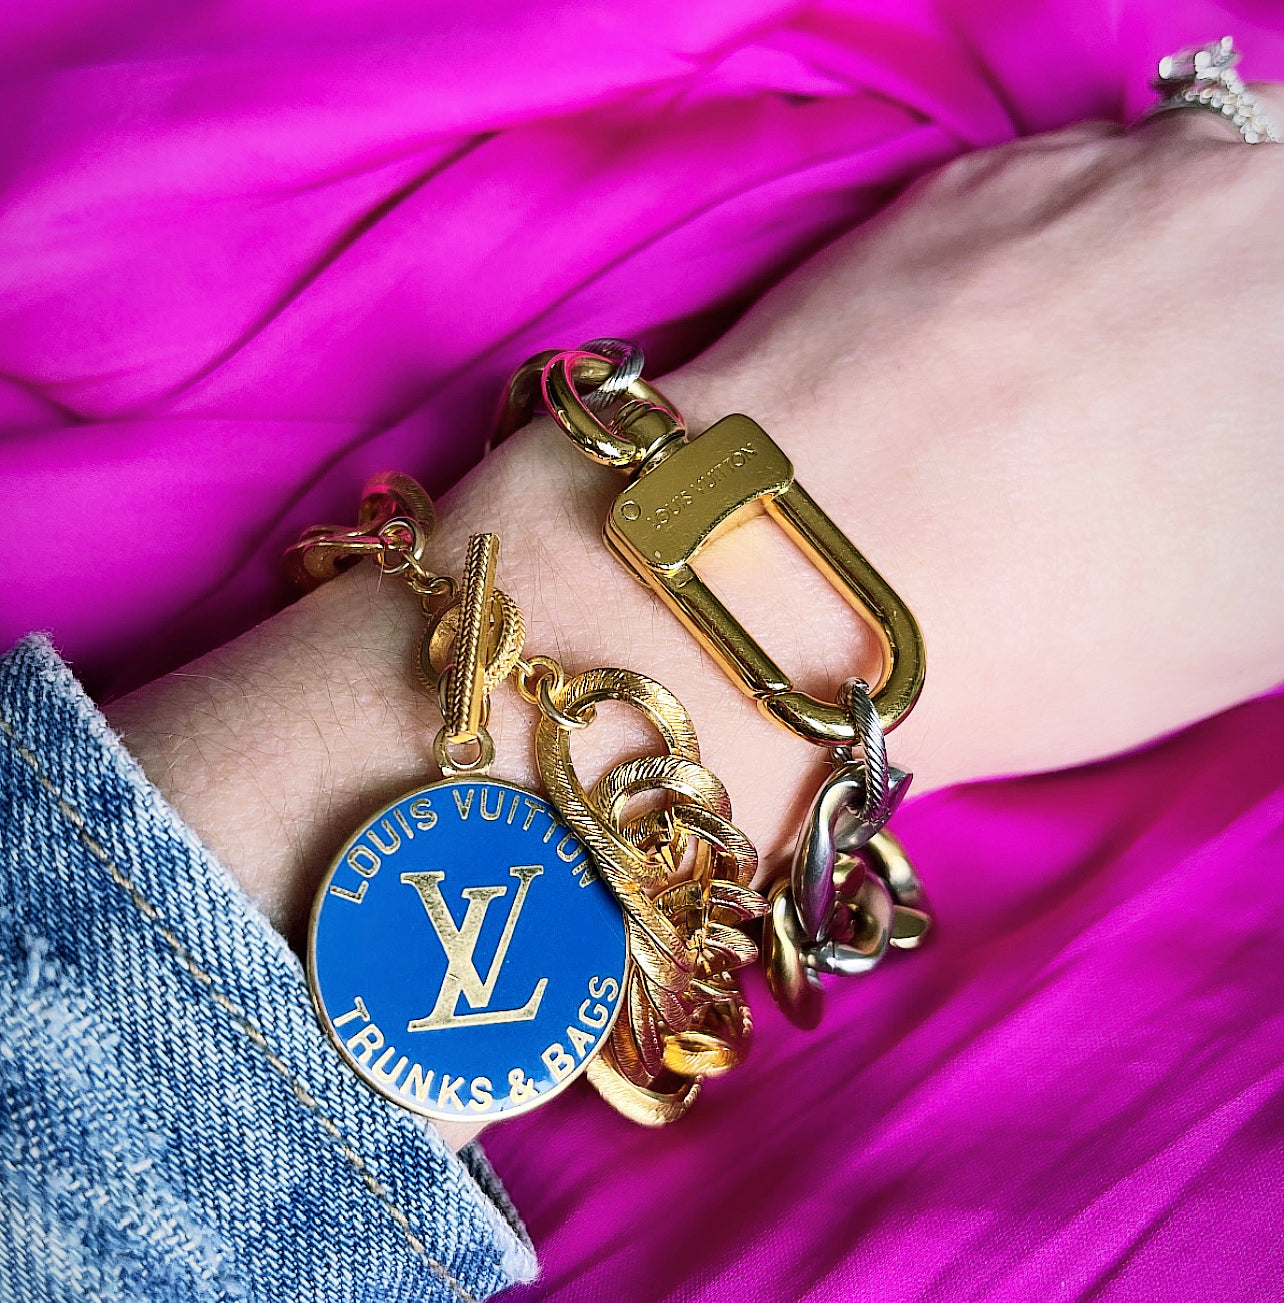 Repurposed Trunks and Bags Louis Vuitton Blue & Gold Tone Charm